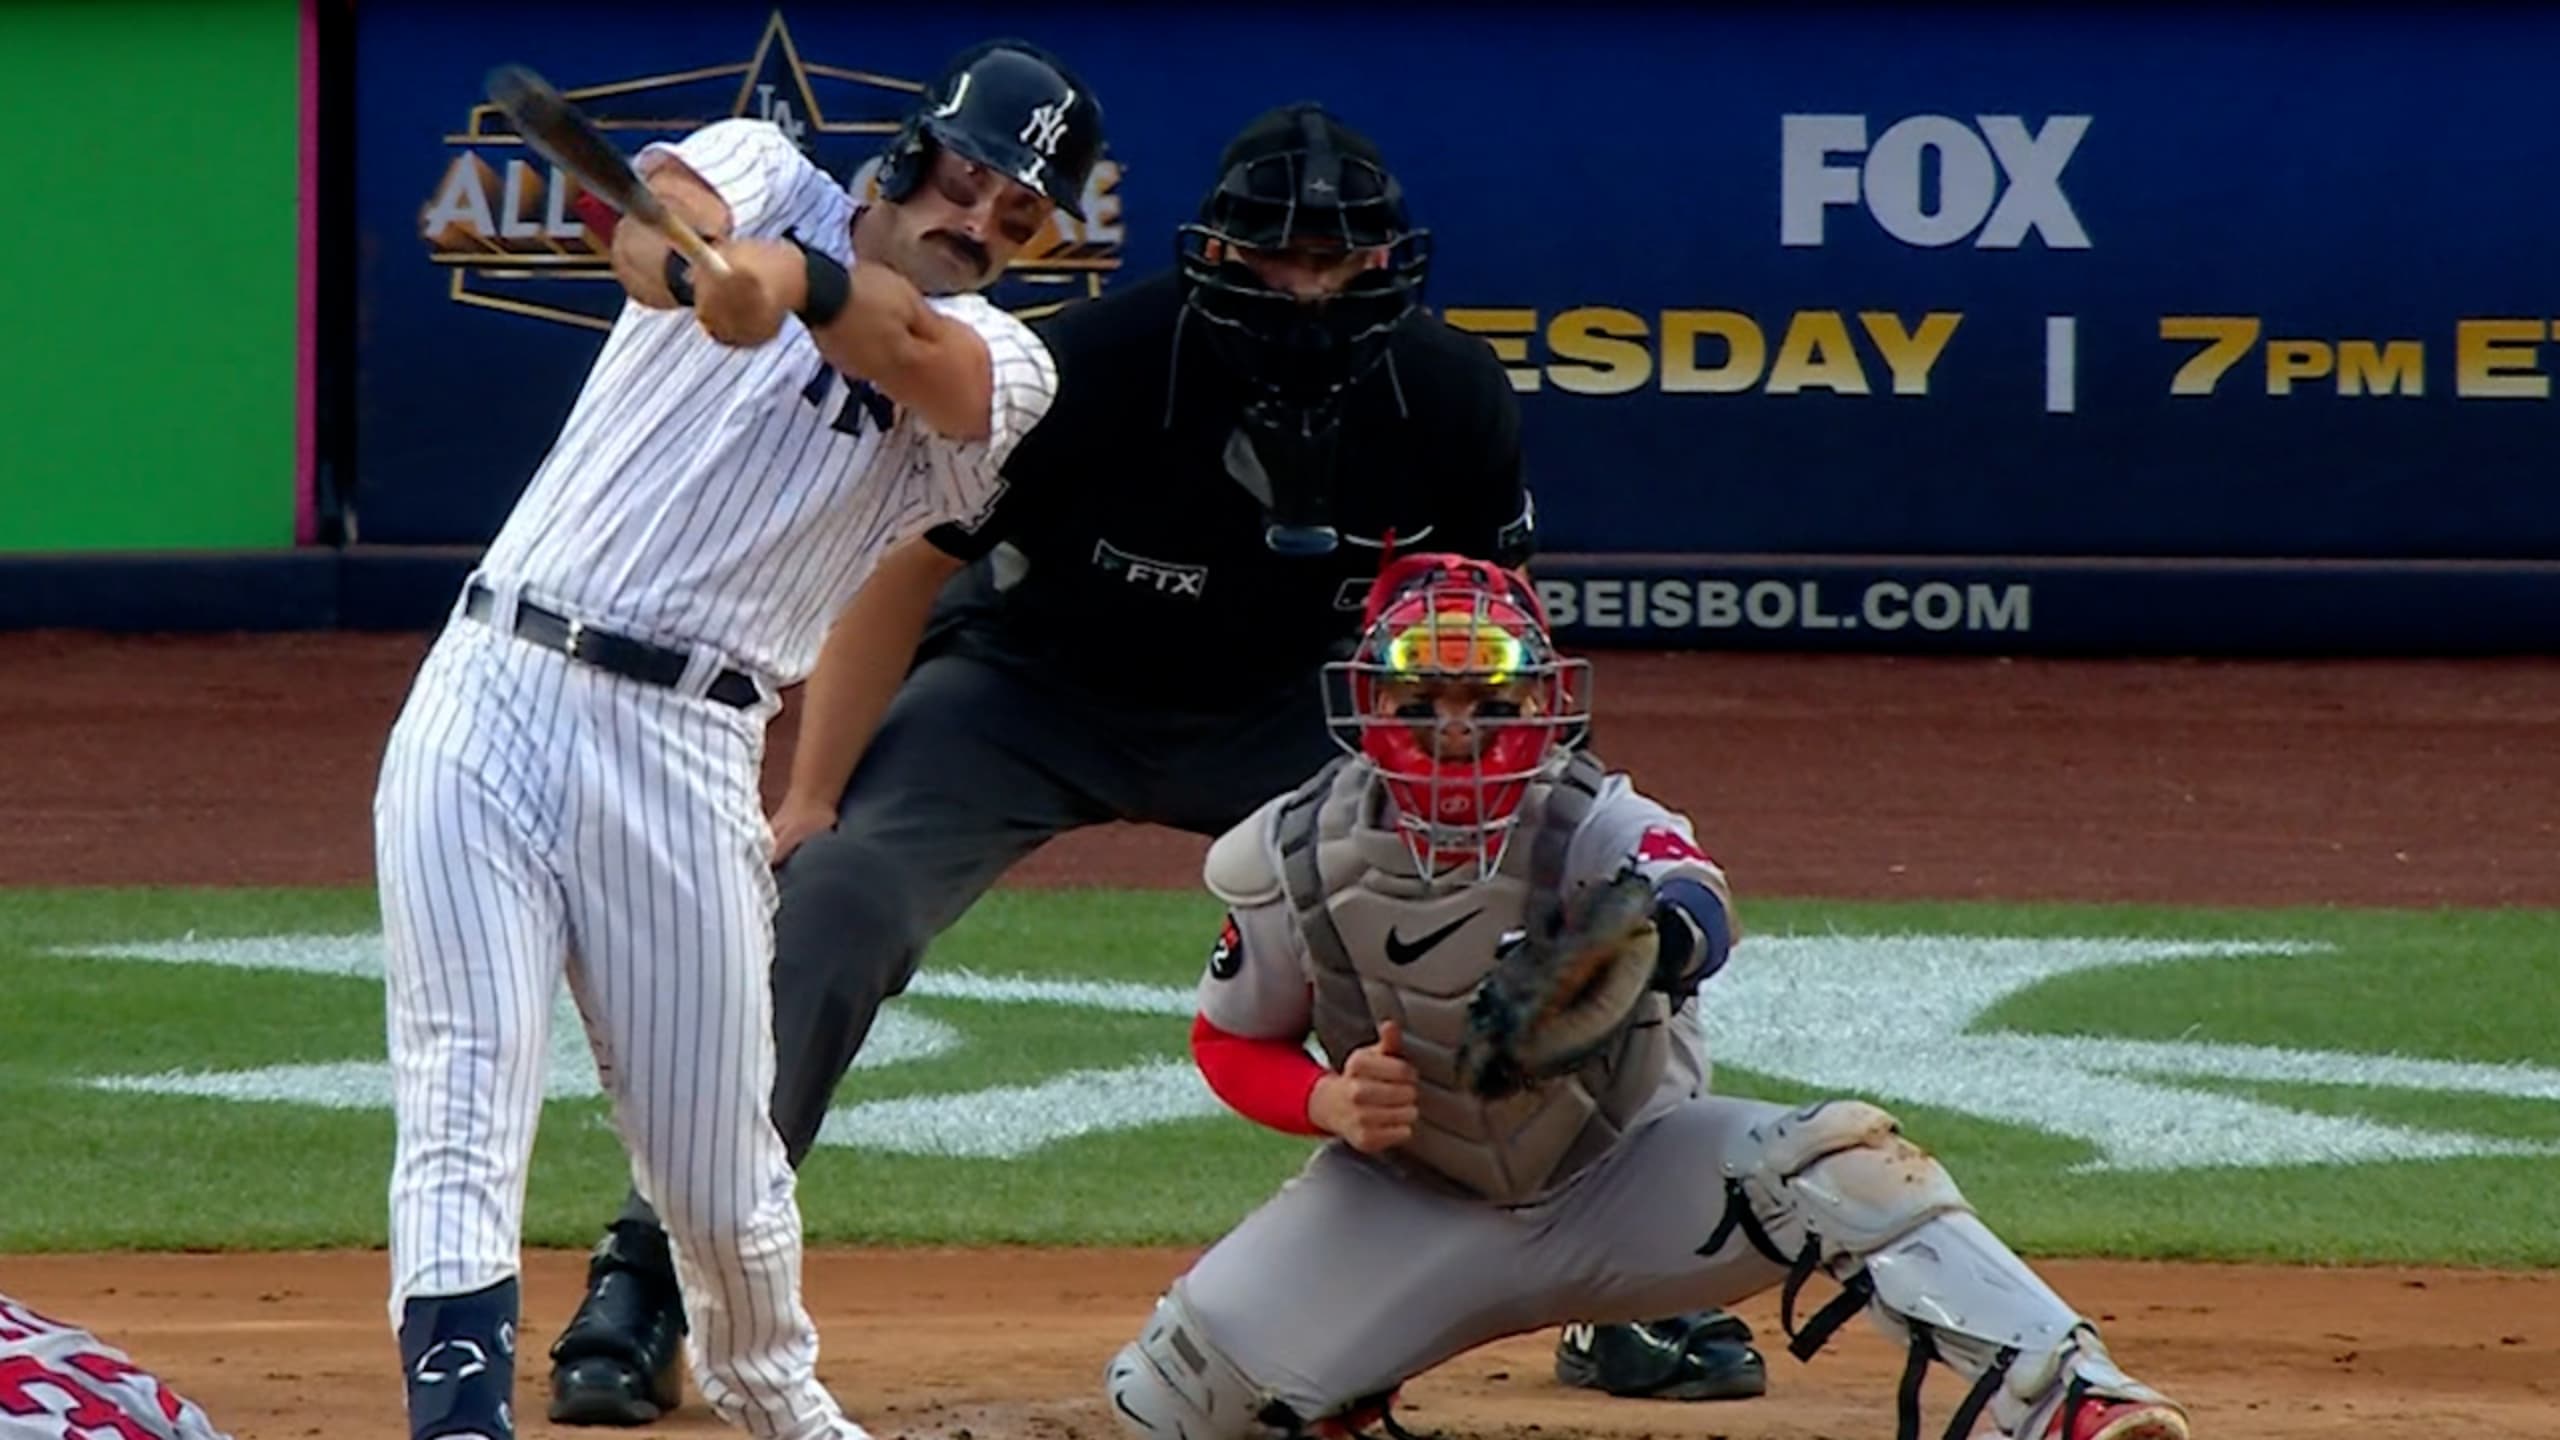 MLB Opening Day: Aaron Judge homers in first at-bat as Yankees captain -  Pinstripe Alley